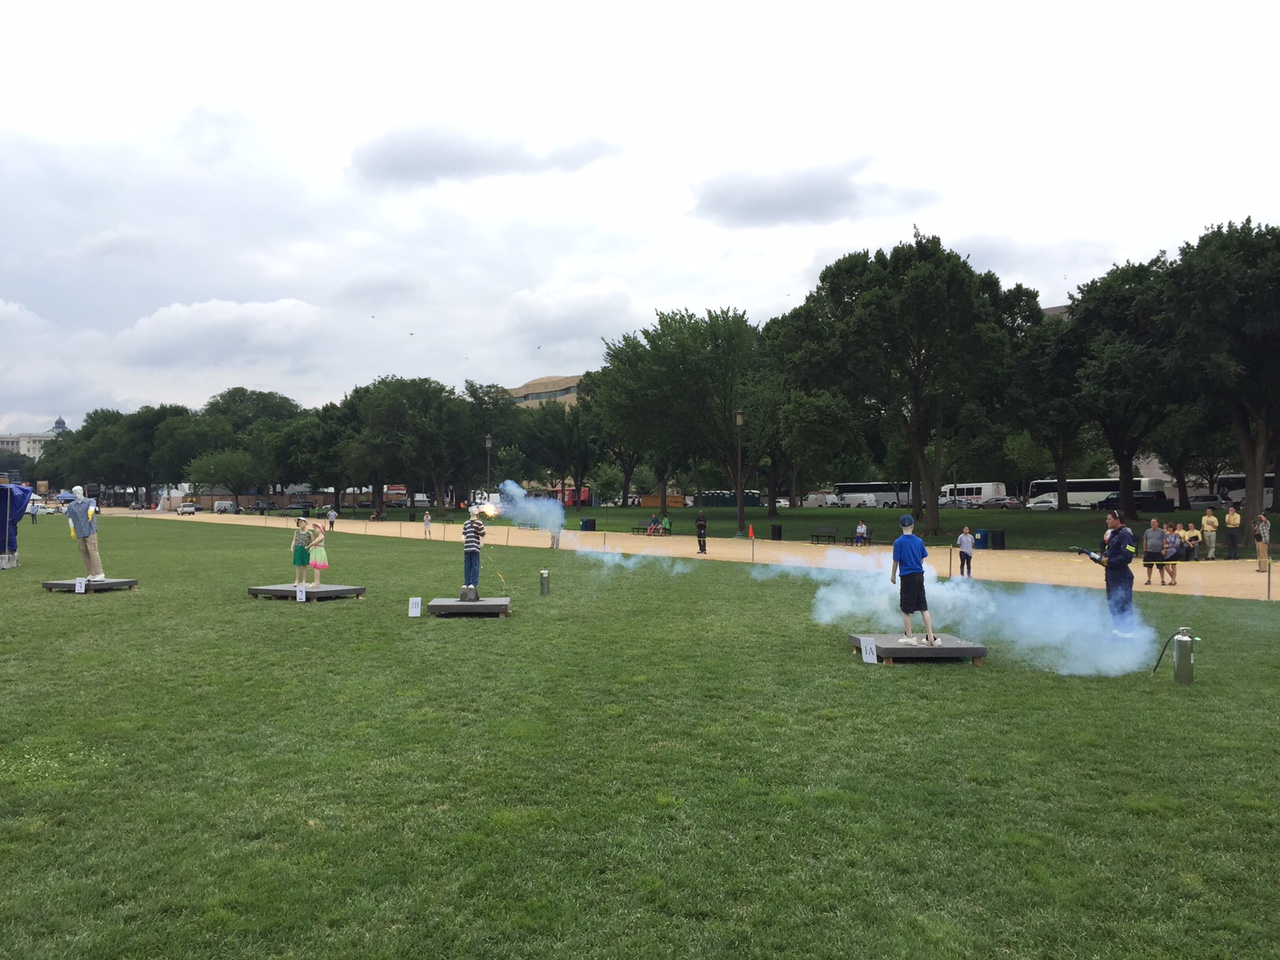 In 2014, more than 100 people were injured by bottle rockets, says CPSC. (WTOP/Kristi King)